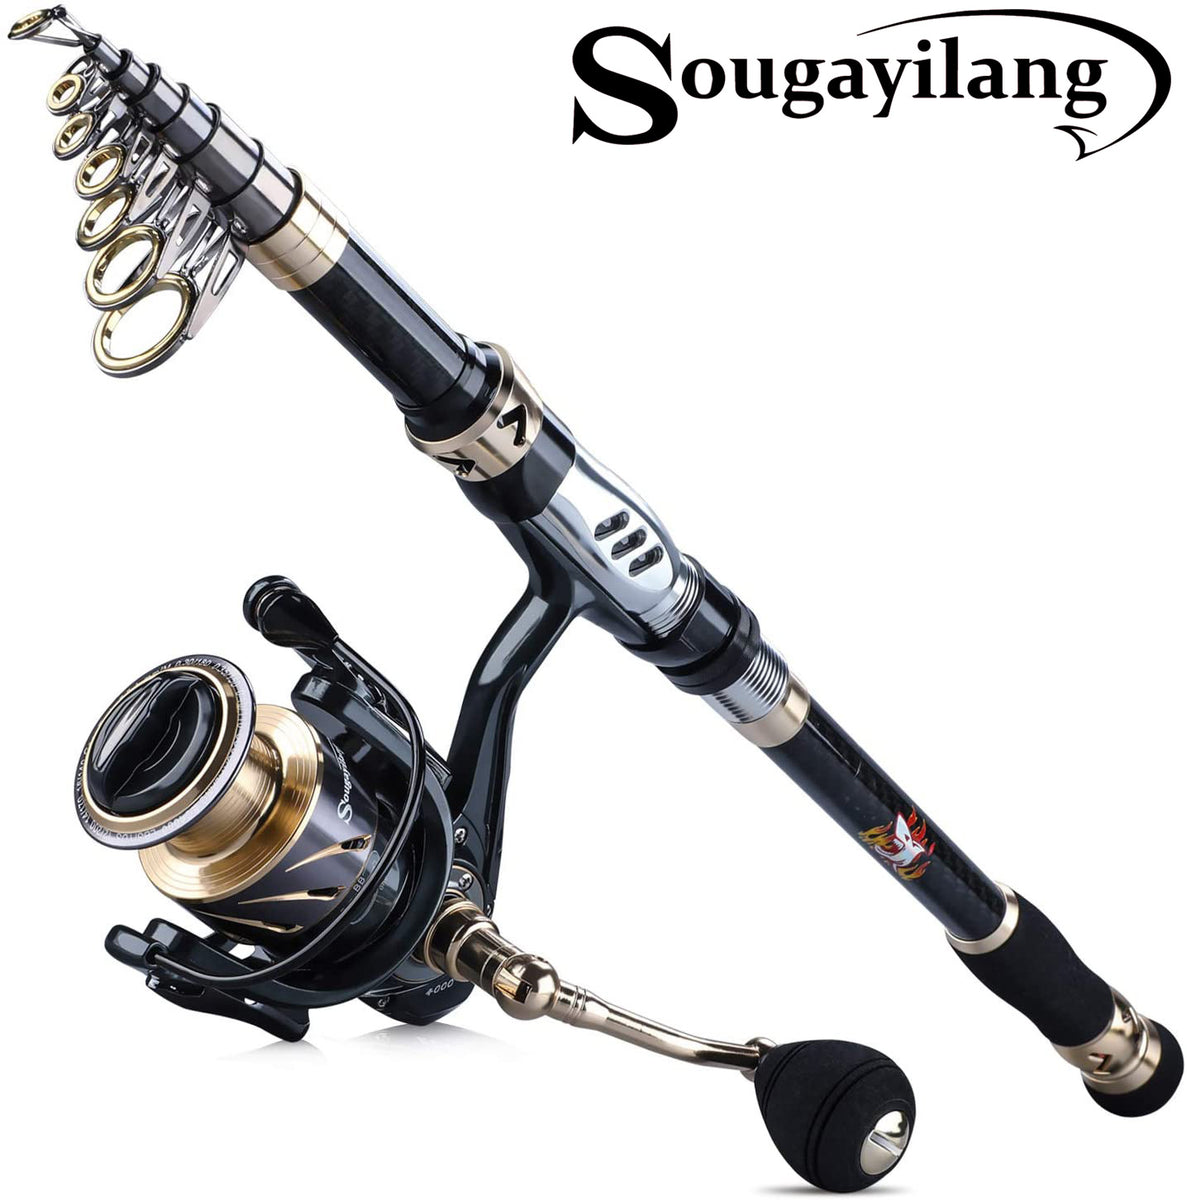 Sougayilang Fishing Rod and Reel Combos,Portable Telescopic Fishing Rod  with Spinning Fishing Reel Set for Travel, Freshwater/Saltwater Fishing